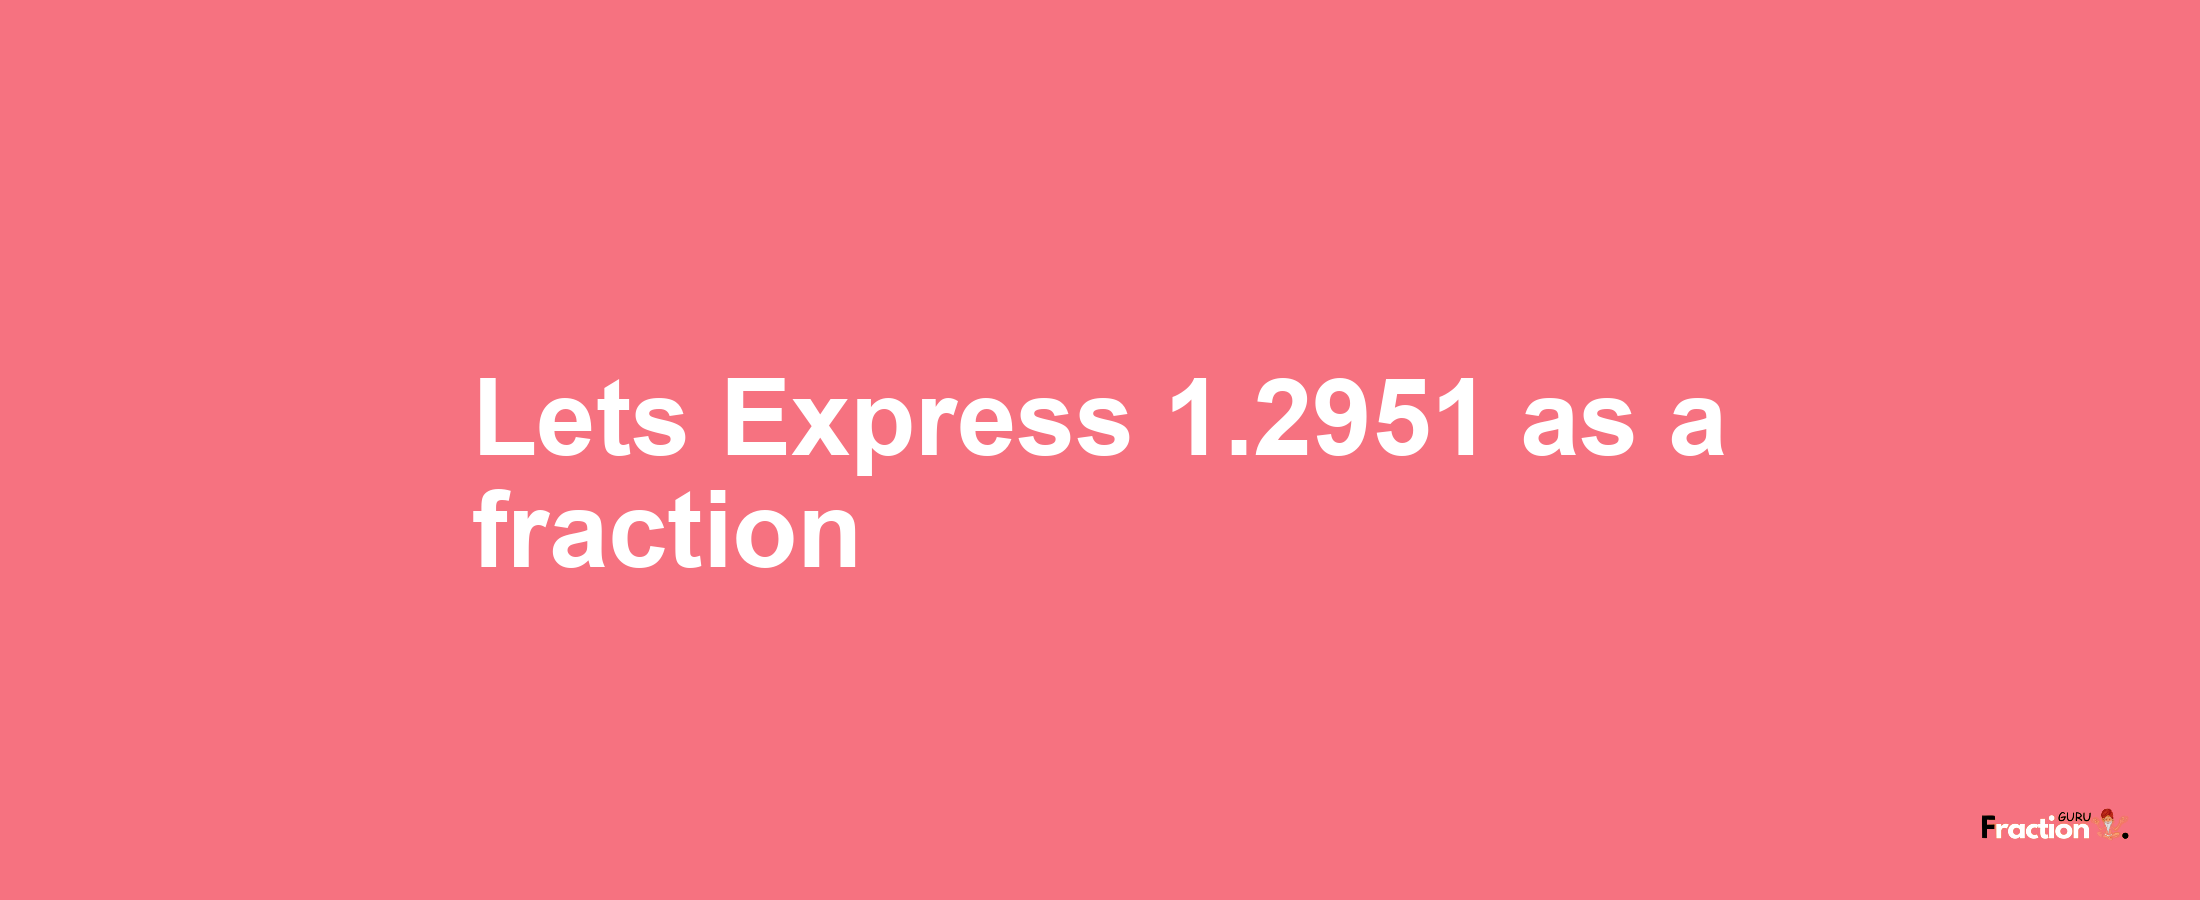 Lets Express 1.2951 as afraction